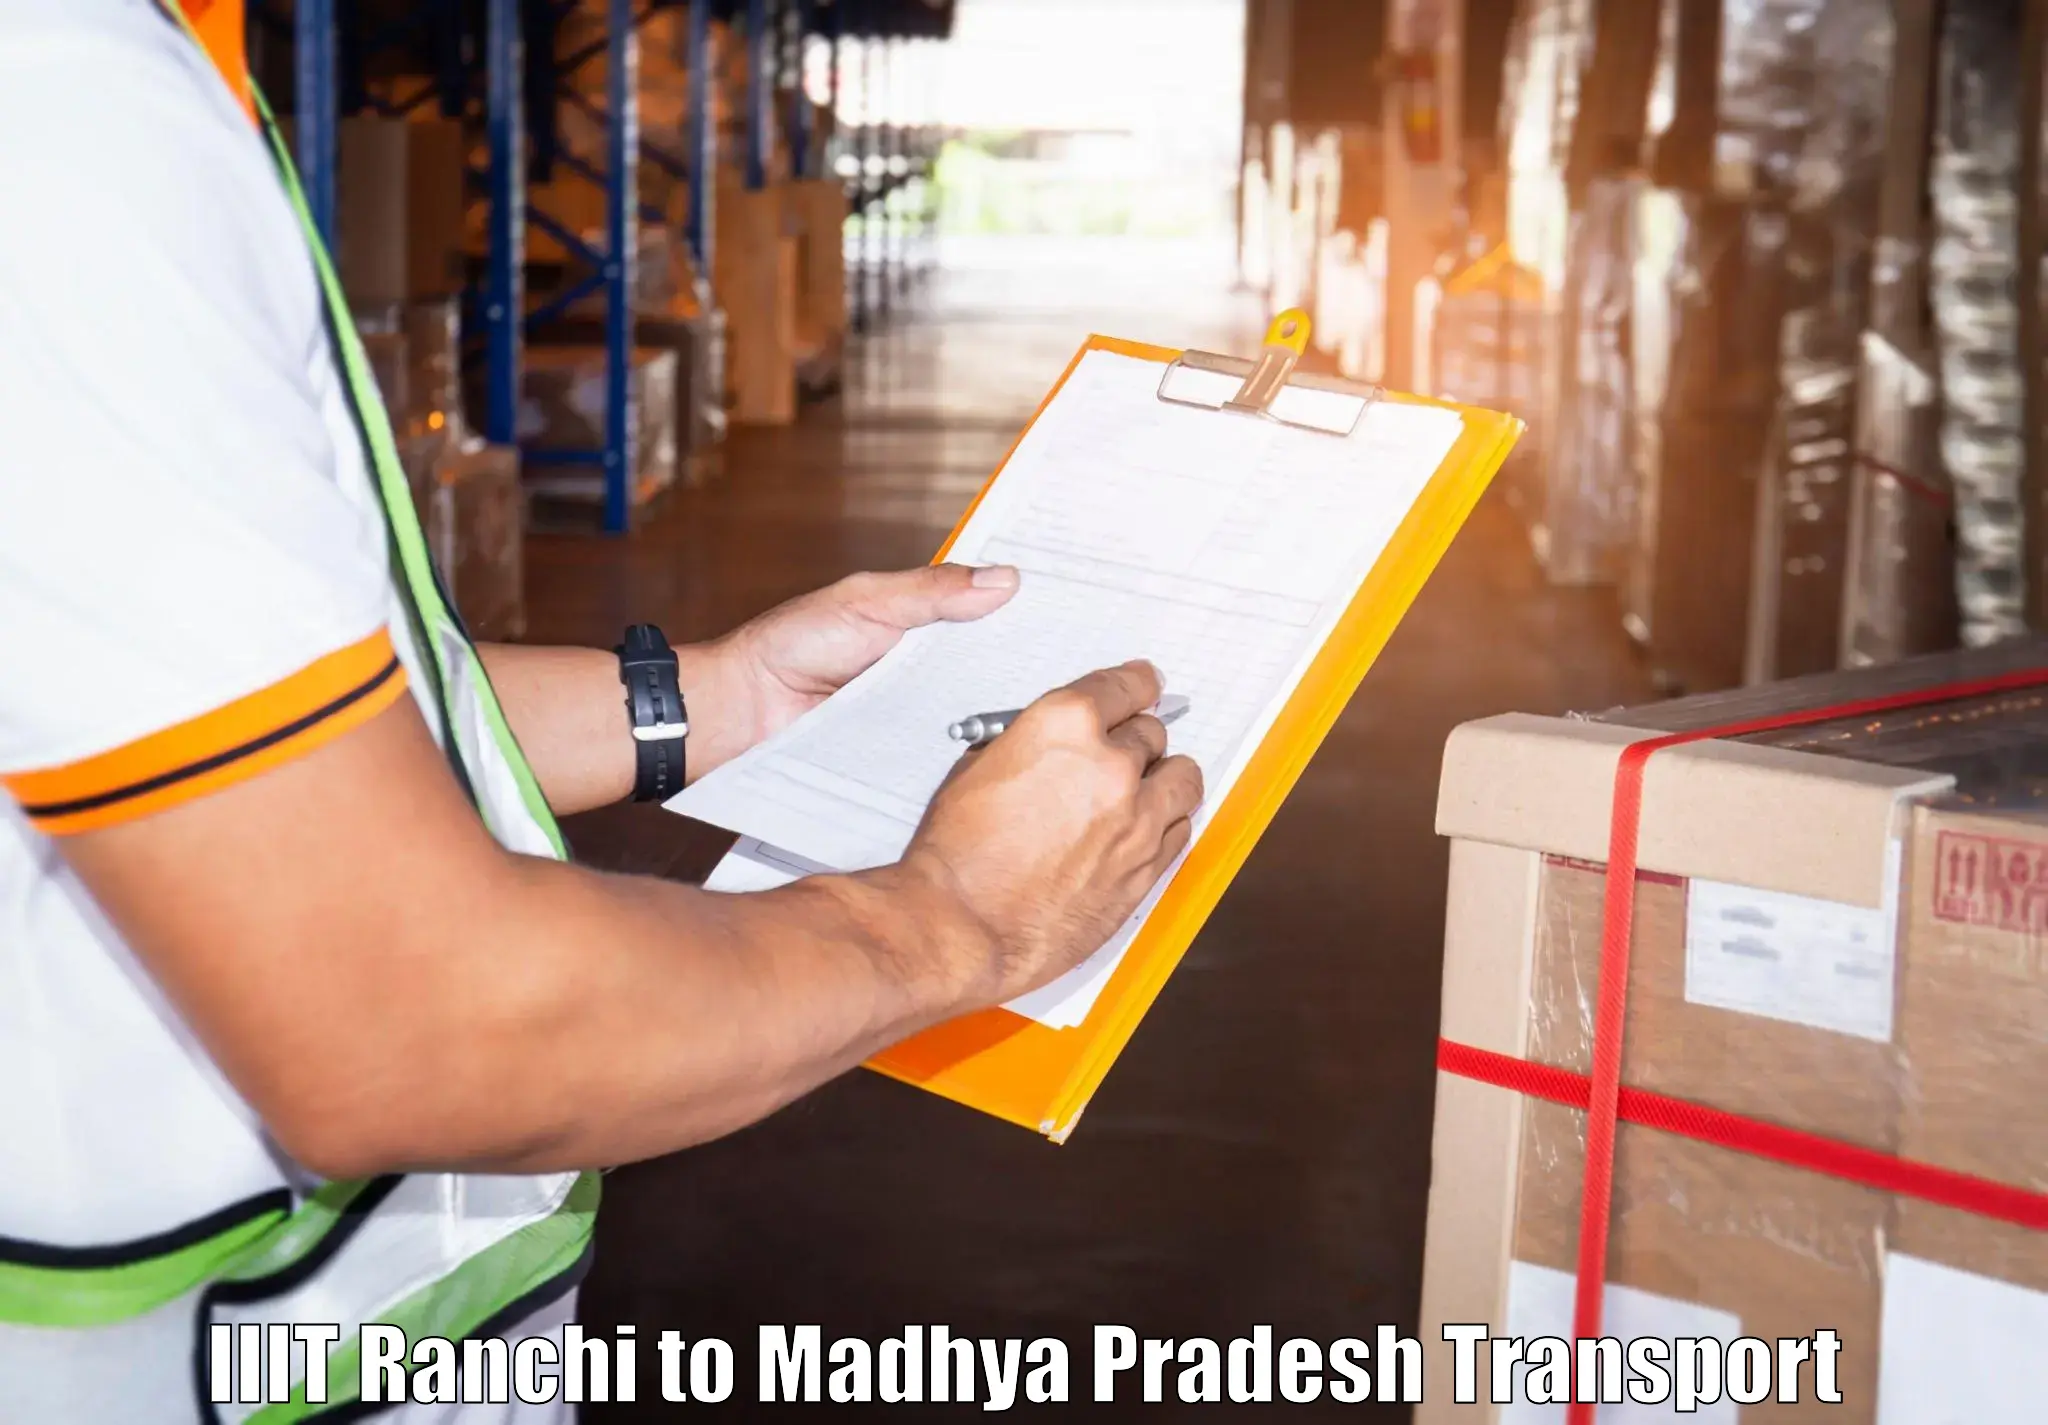 Cargo transport services IIIT Ranchi to Sidhi